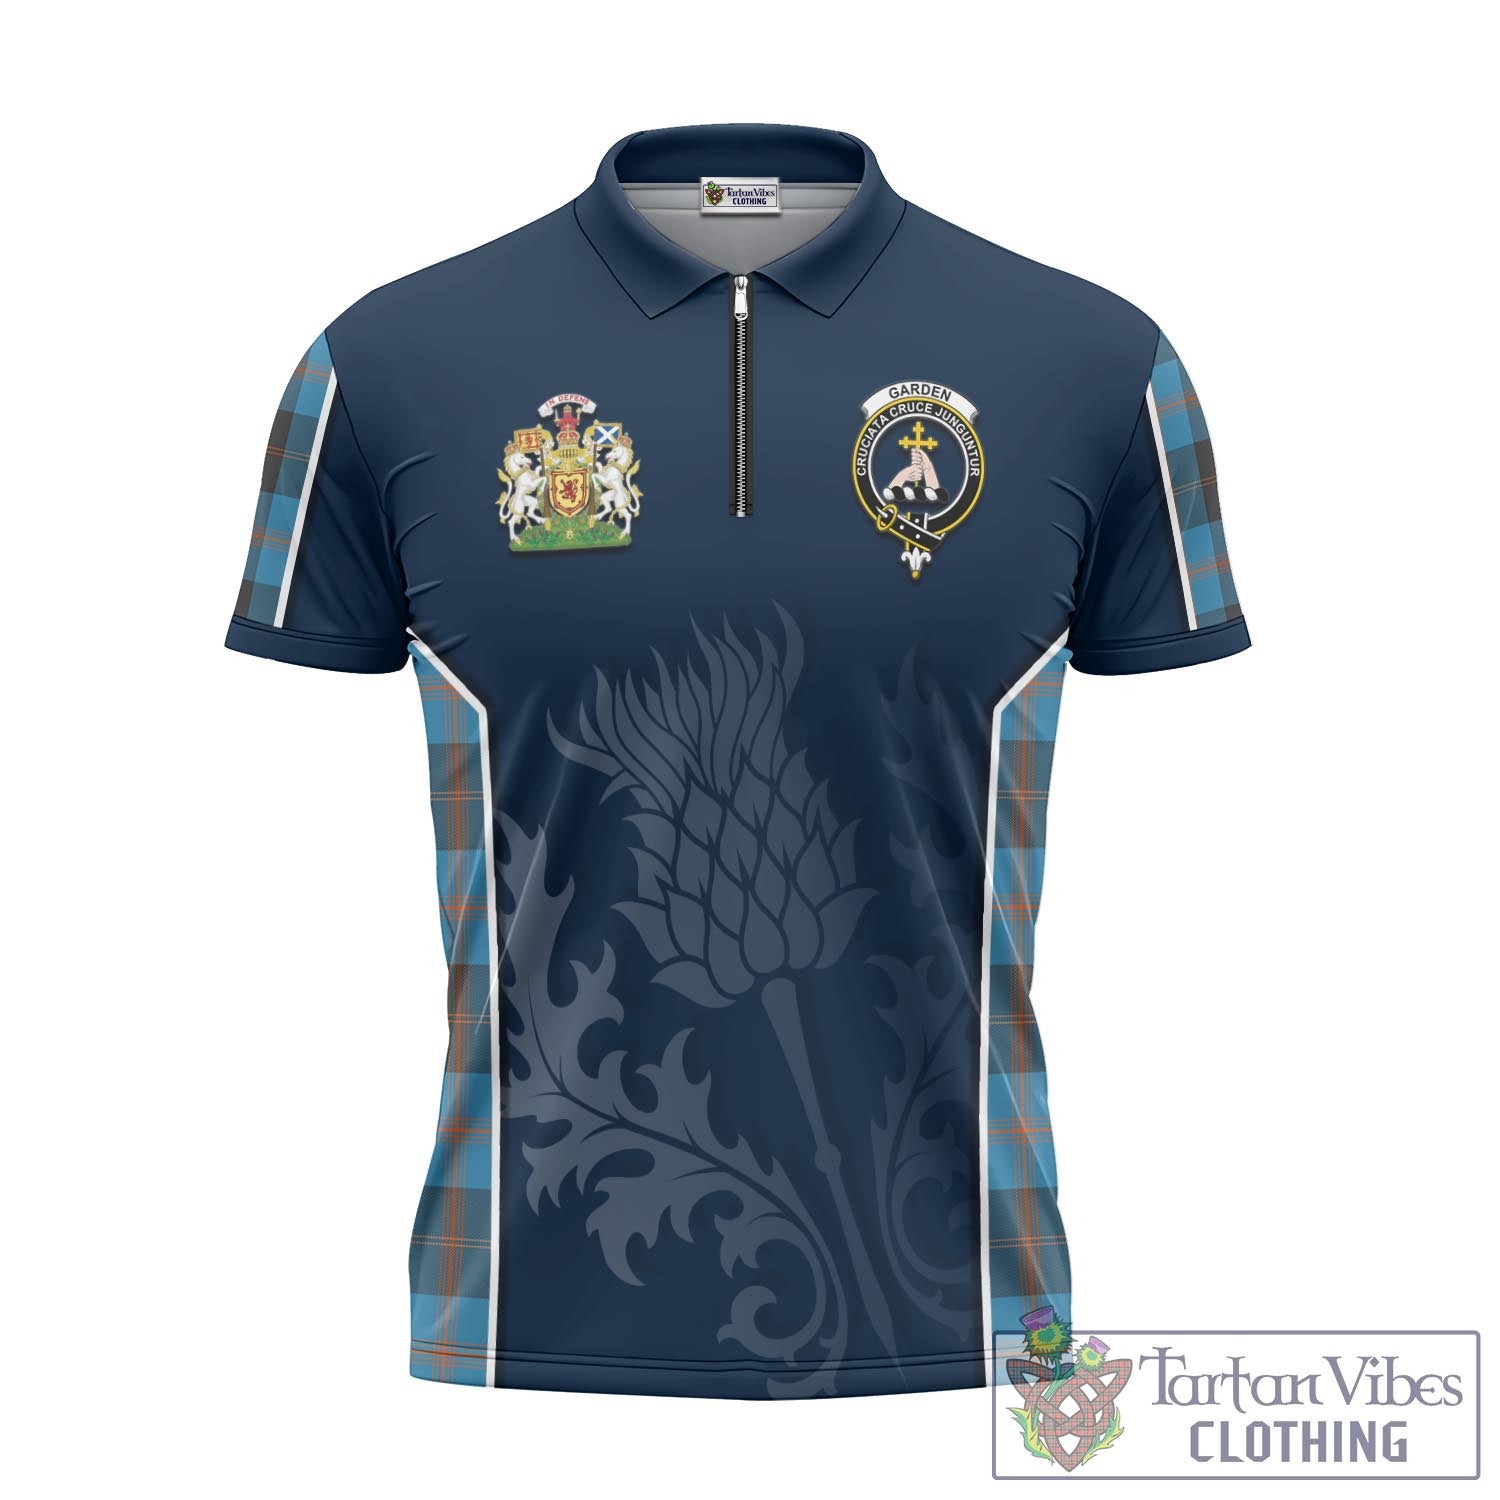 Tartan Vibes Clothing Garden Tartan Zipper Polo Shirt with Family Crest and Scottish Thistle Vibes Sport Style